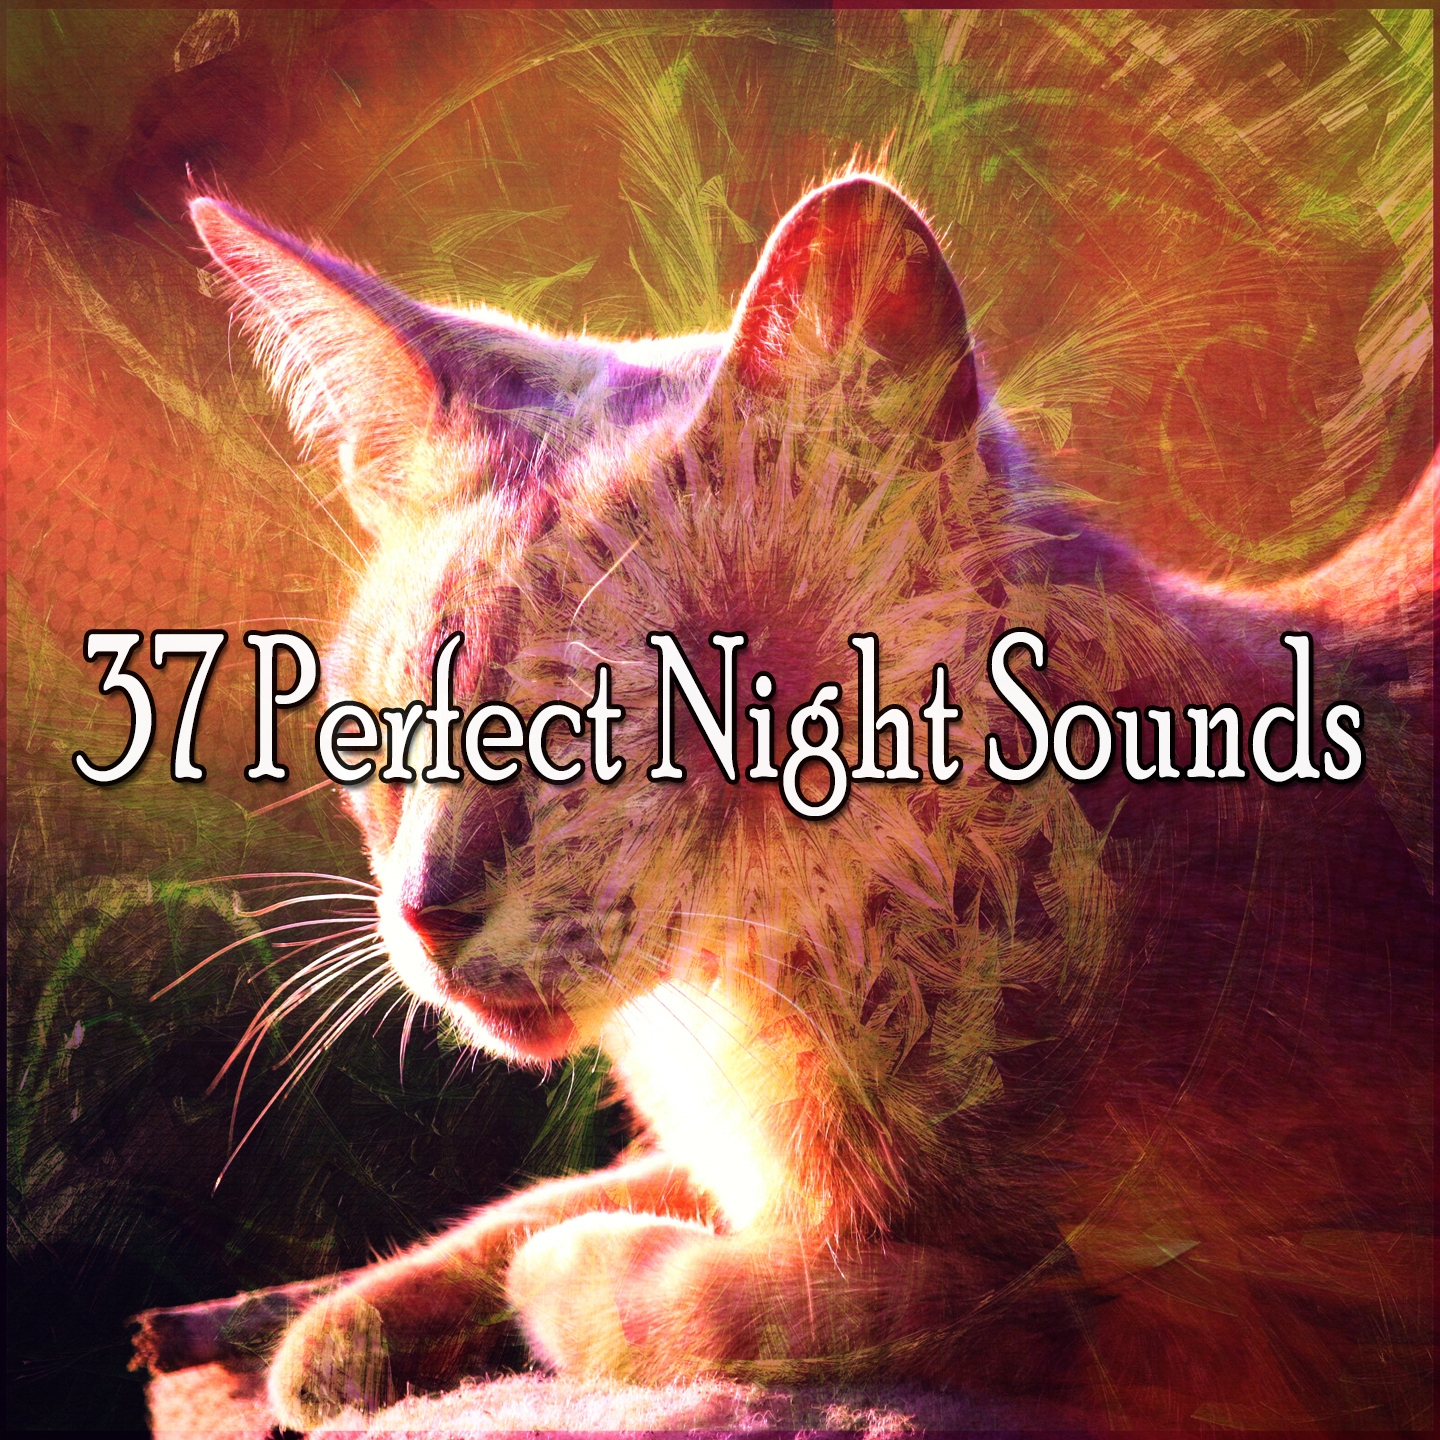 37 Perfect Night Sounds